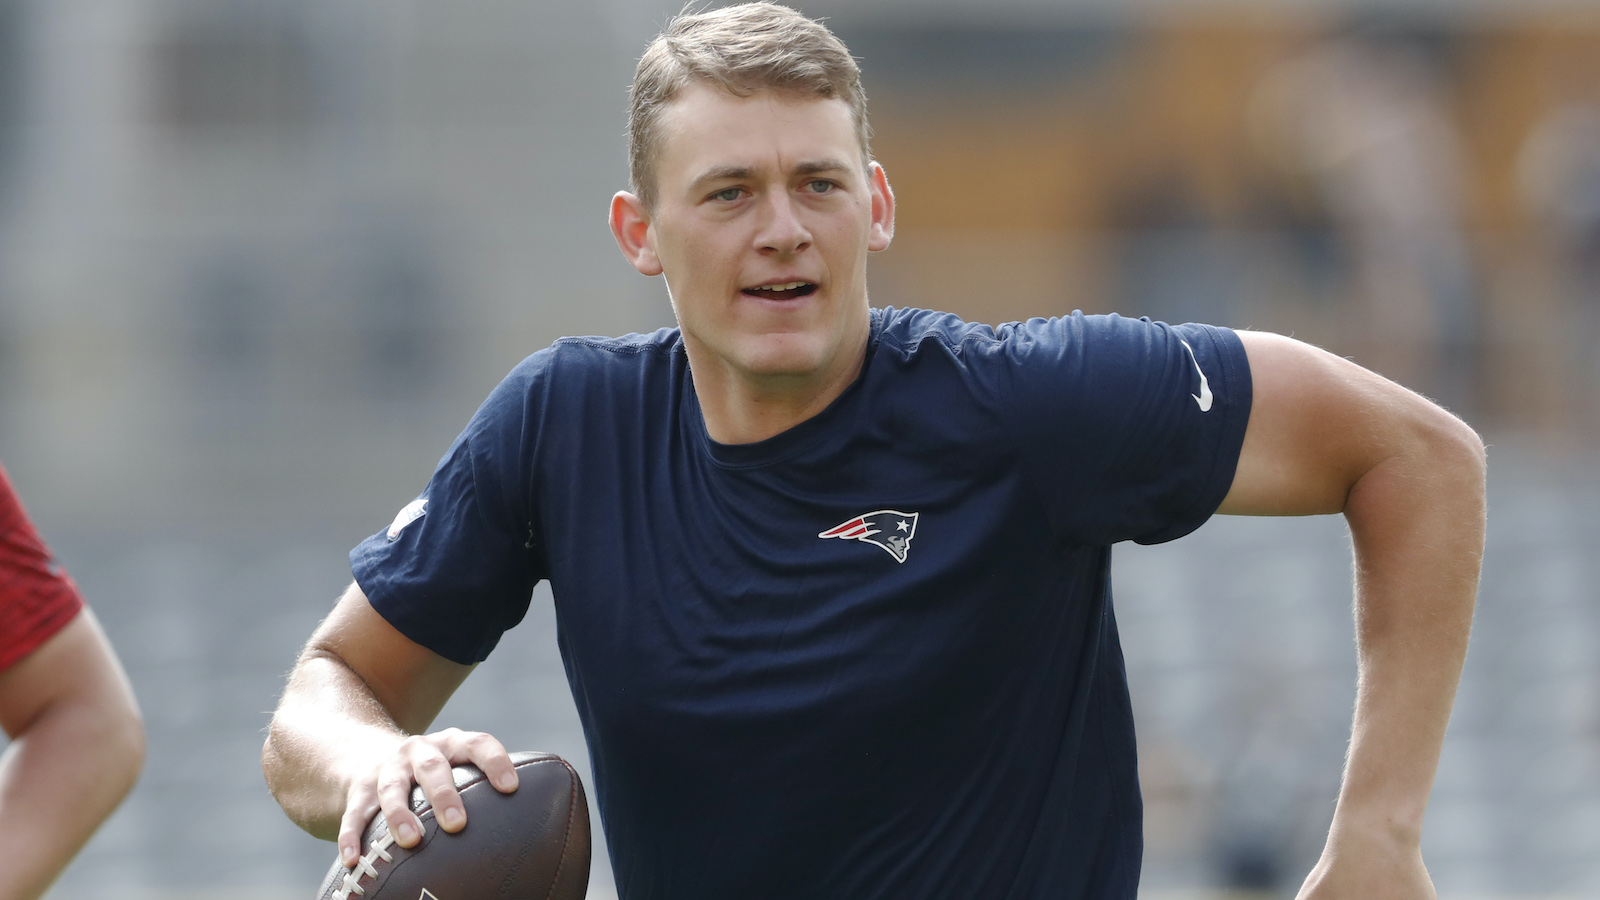 Ex-Patriot makes interesting claim about team's QB situation